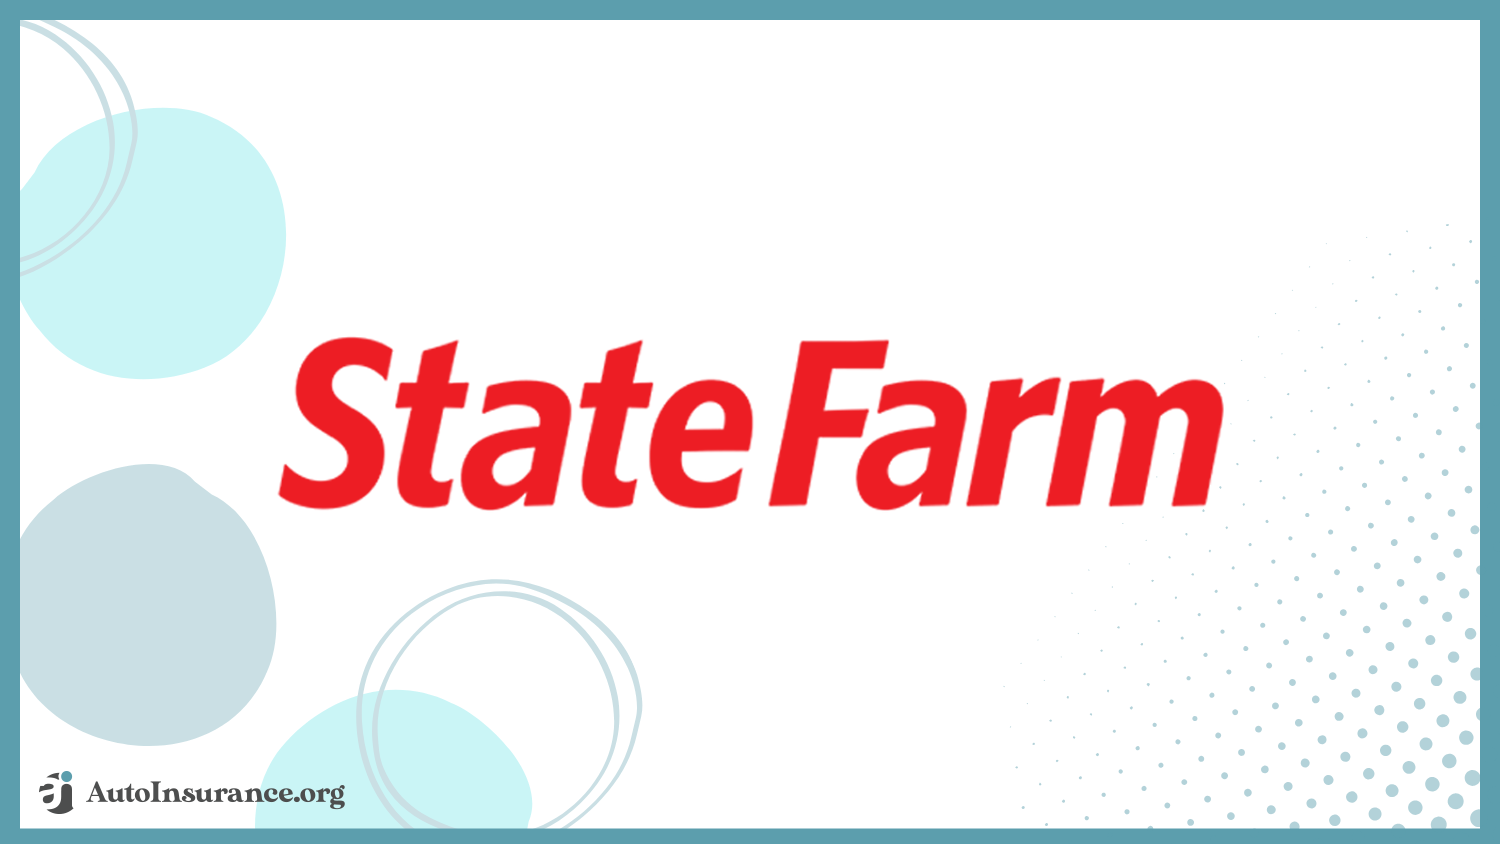 State Farm: cheap auto insurance for drivers over 80